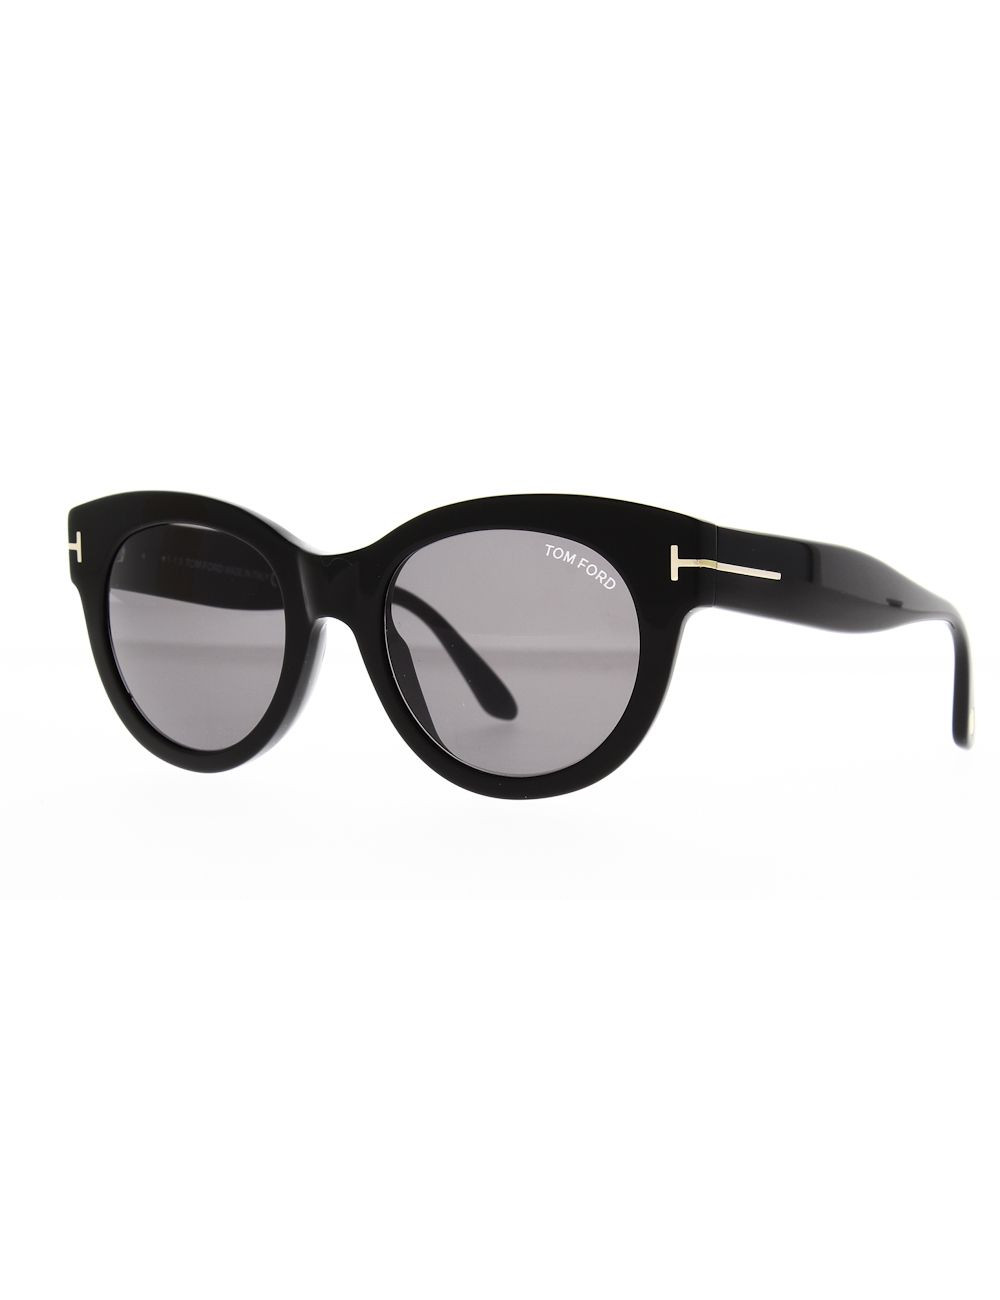 Tom Ford FT 741 01A